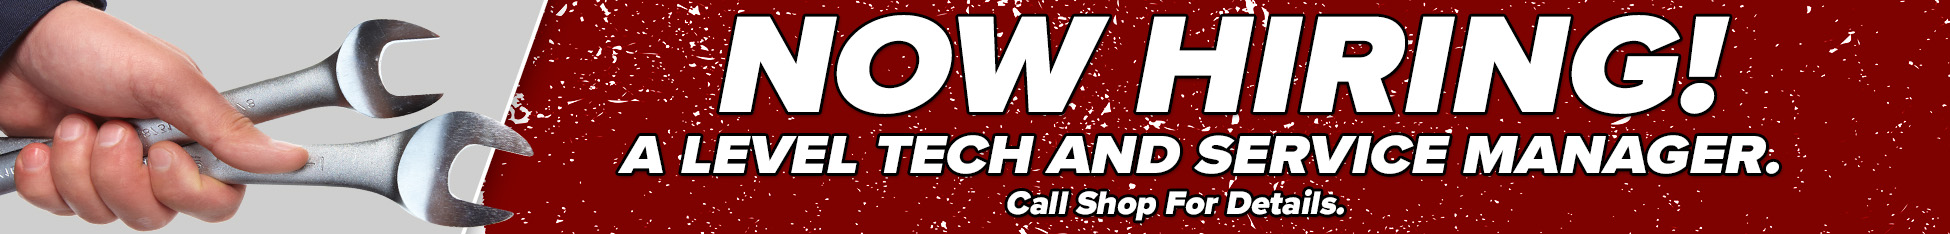 Now Hiring- A Level Tech and Service Manager. Call Shop For Details